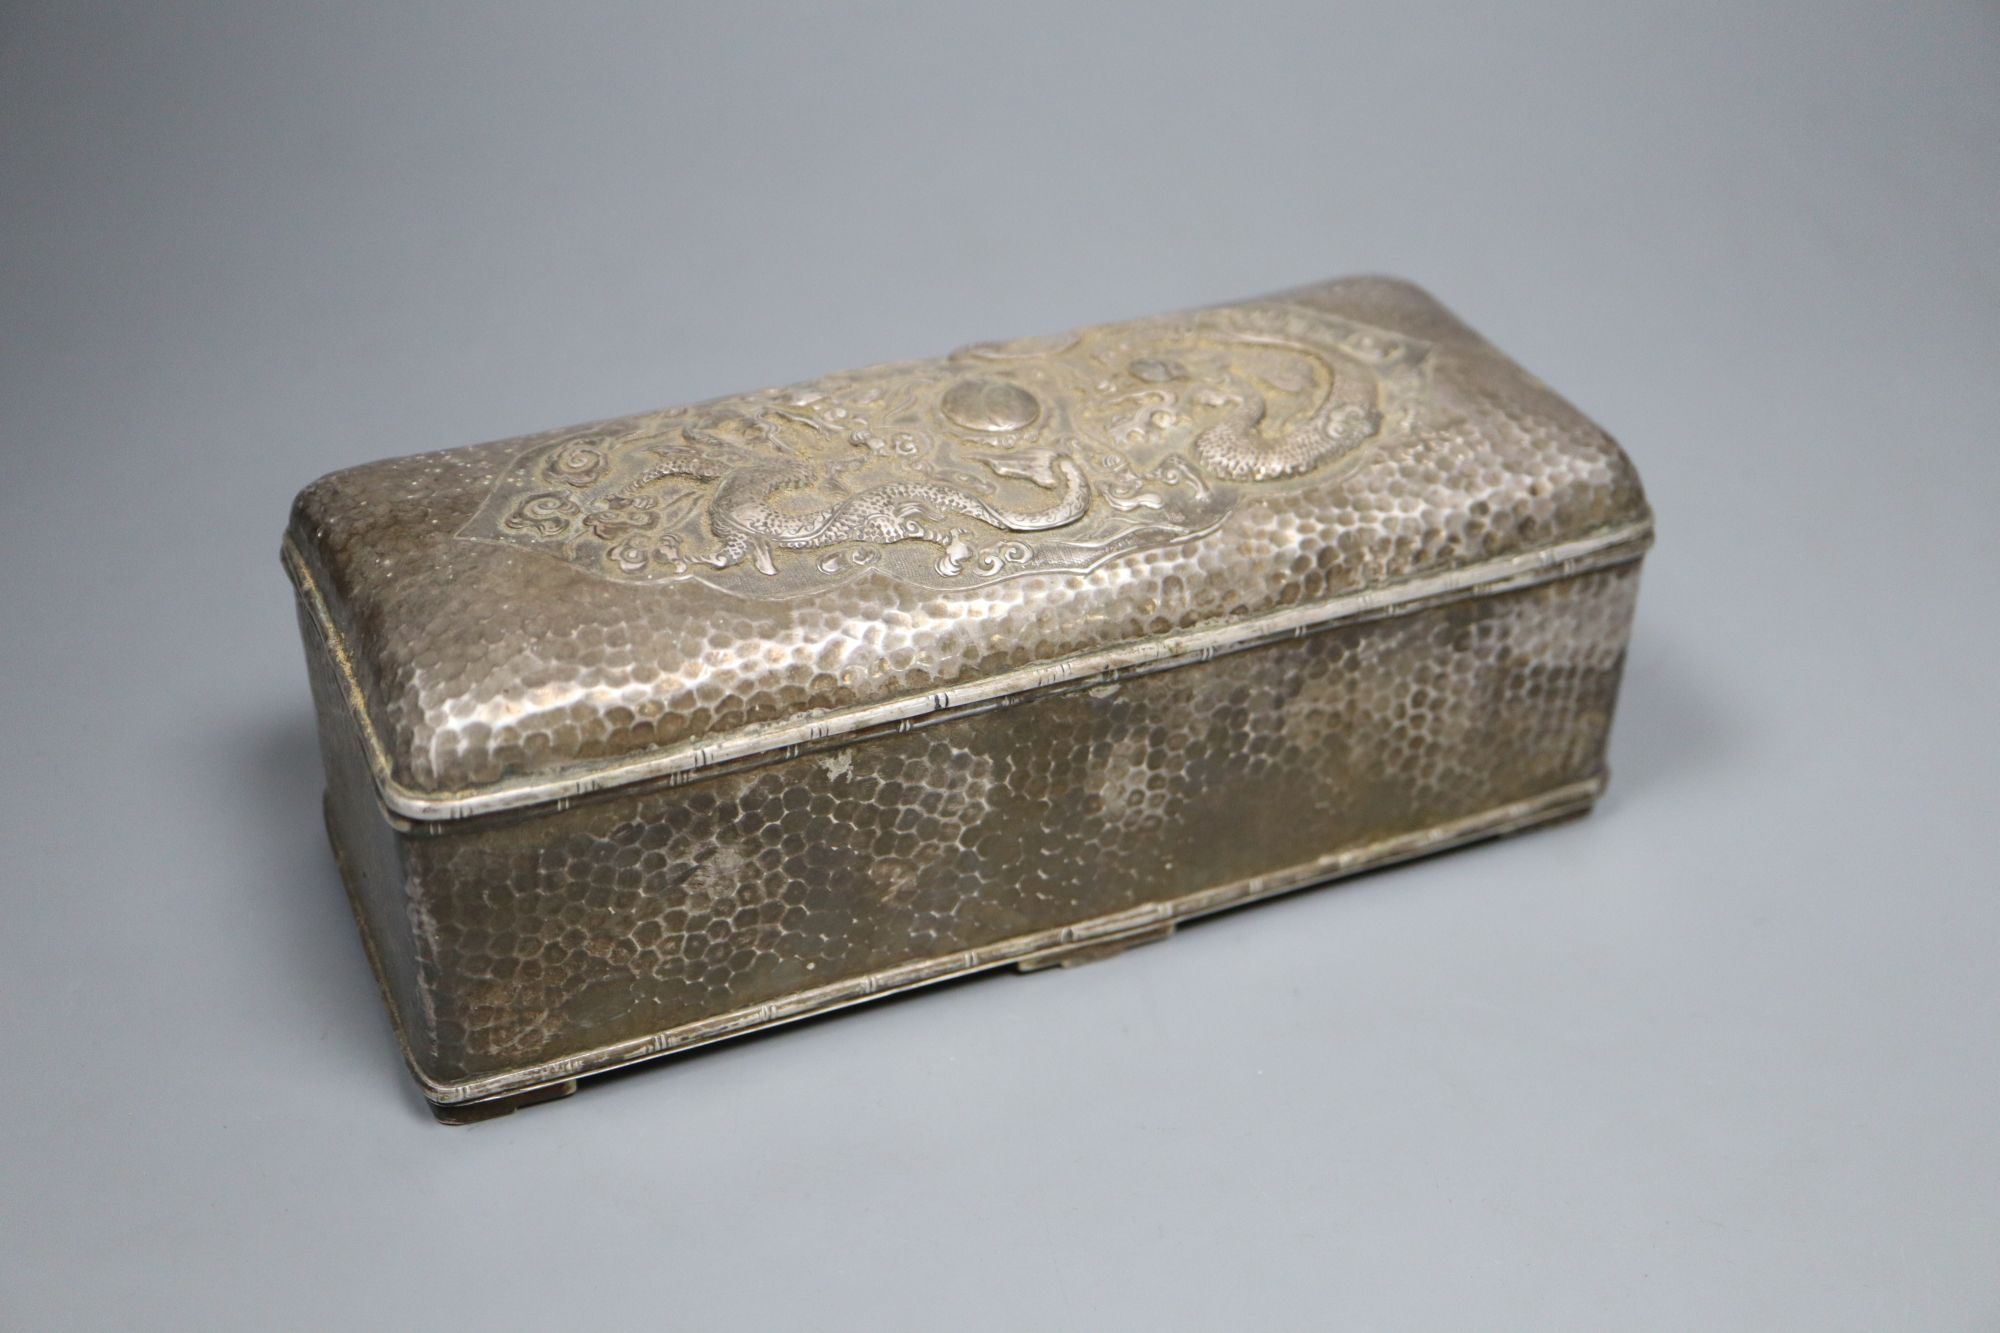 A Chinese planished silver casket, c.1900, with twin dragon decoration and divided interior, marks worn, 19cm